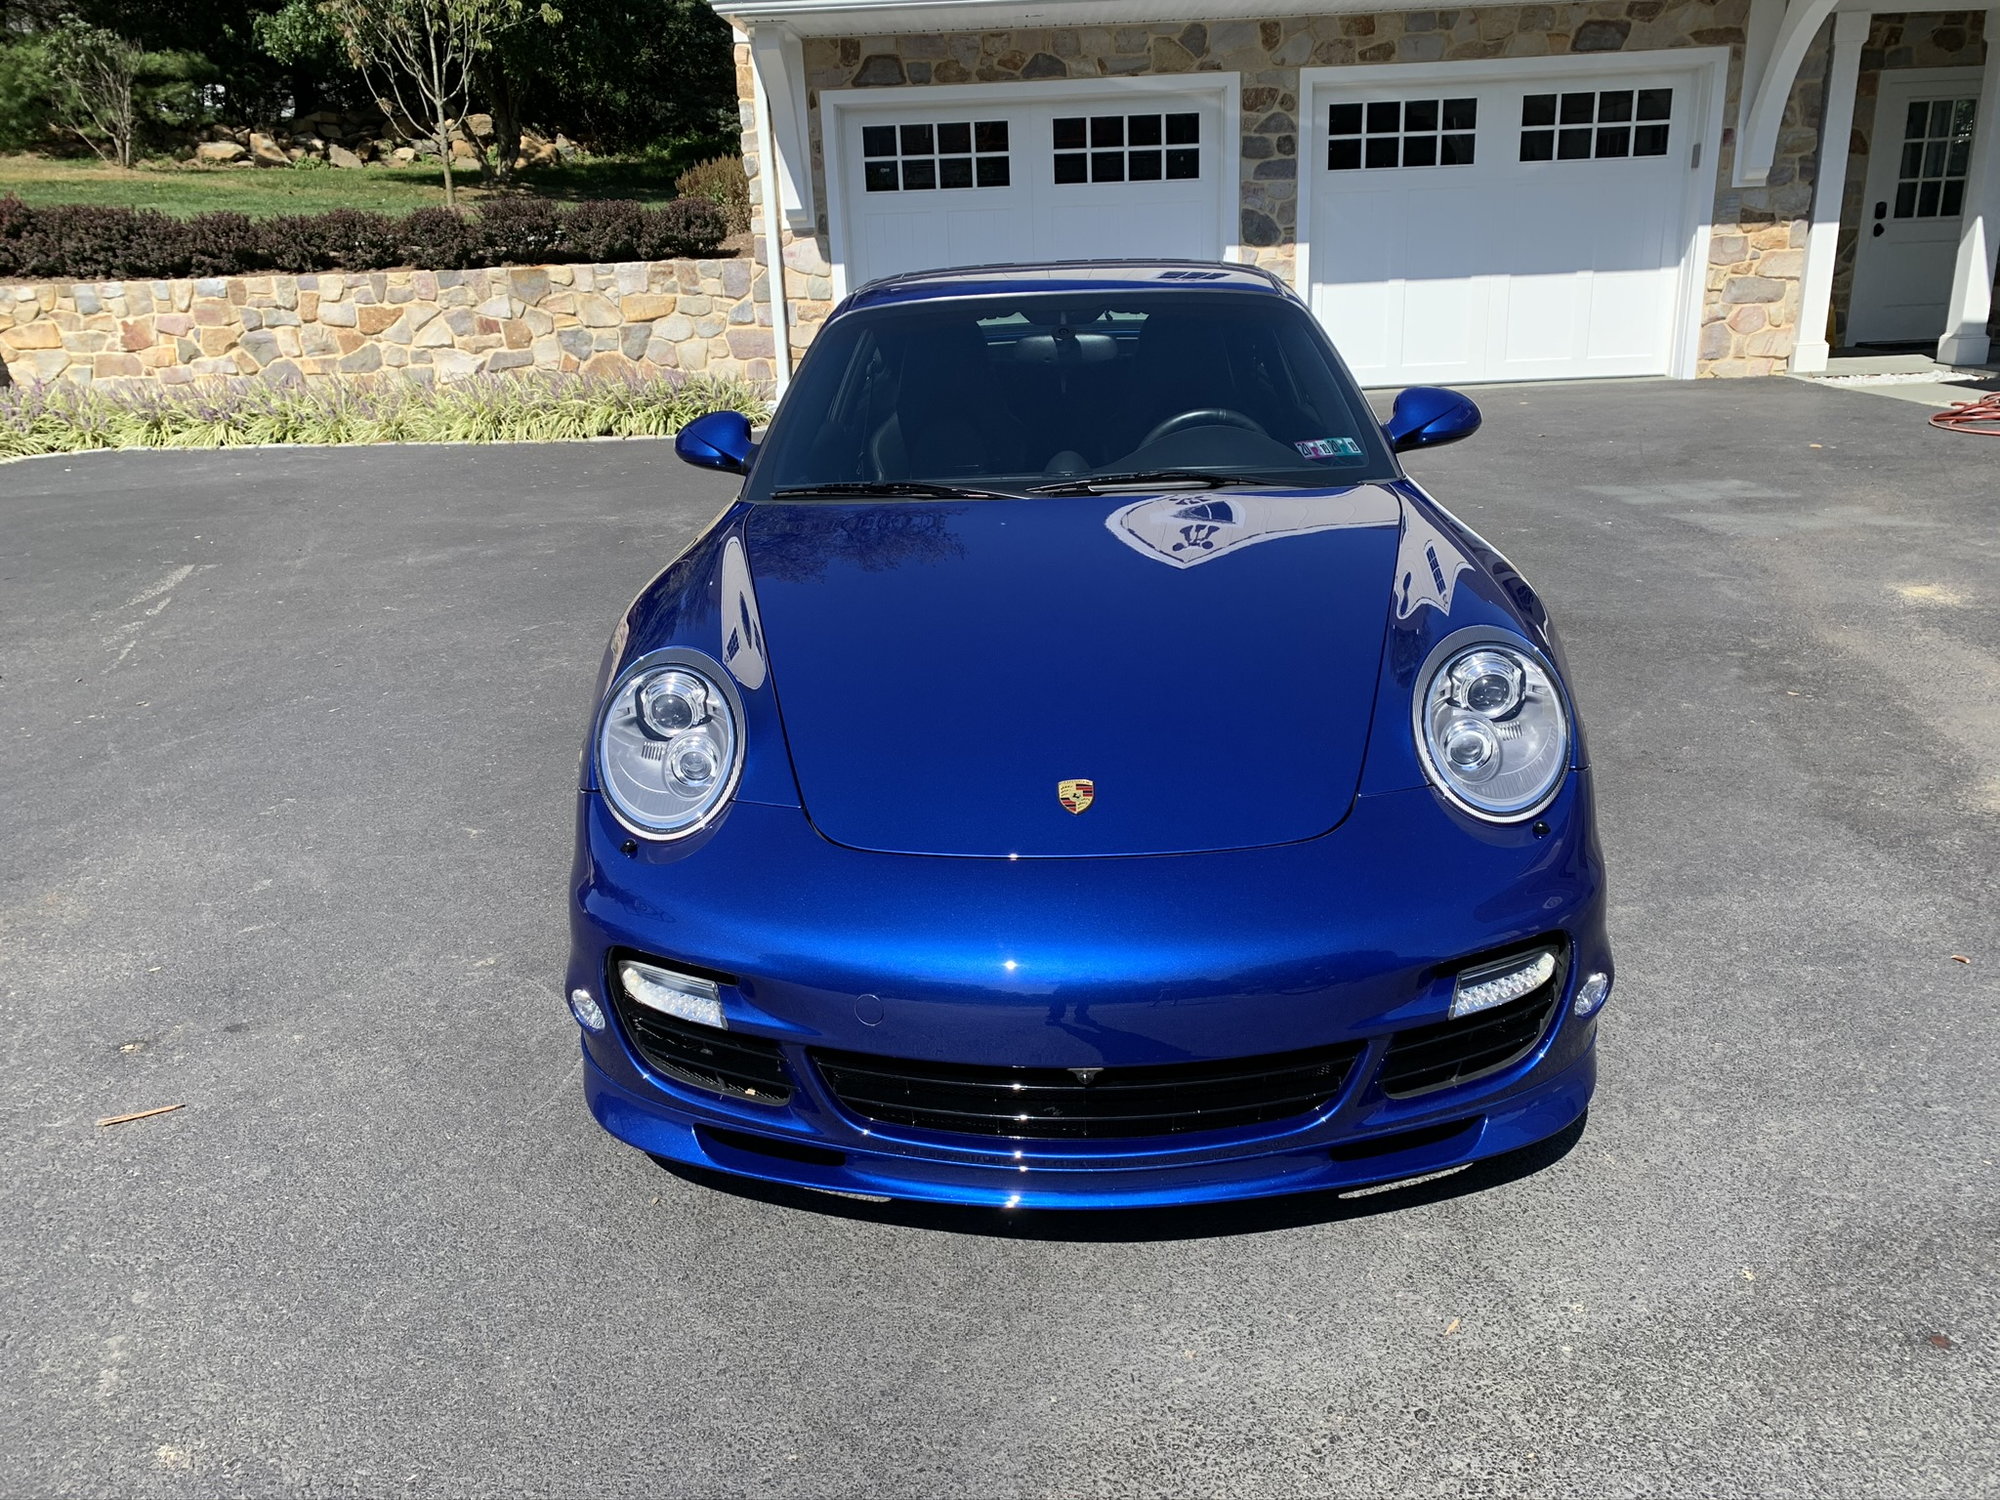 2012 Porsche 911 -  - Used - VIN WP0AD2A96CS766681 - 6 cyl - AWD - Automatic - Coupe - Blue - Malvern, PA 19355, United States